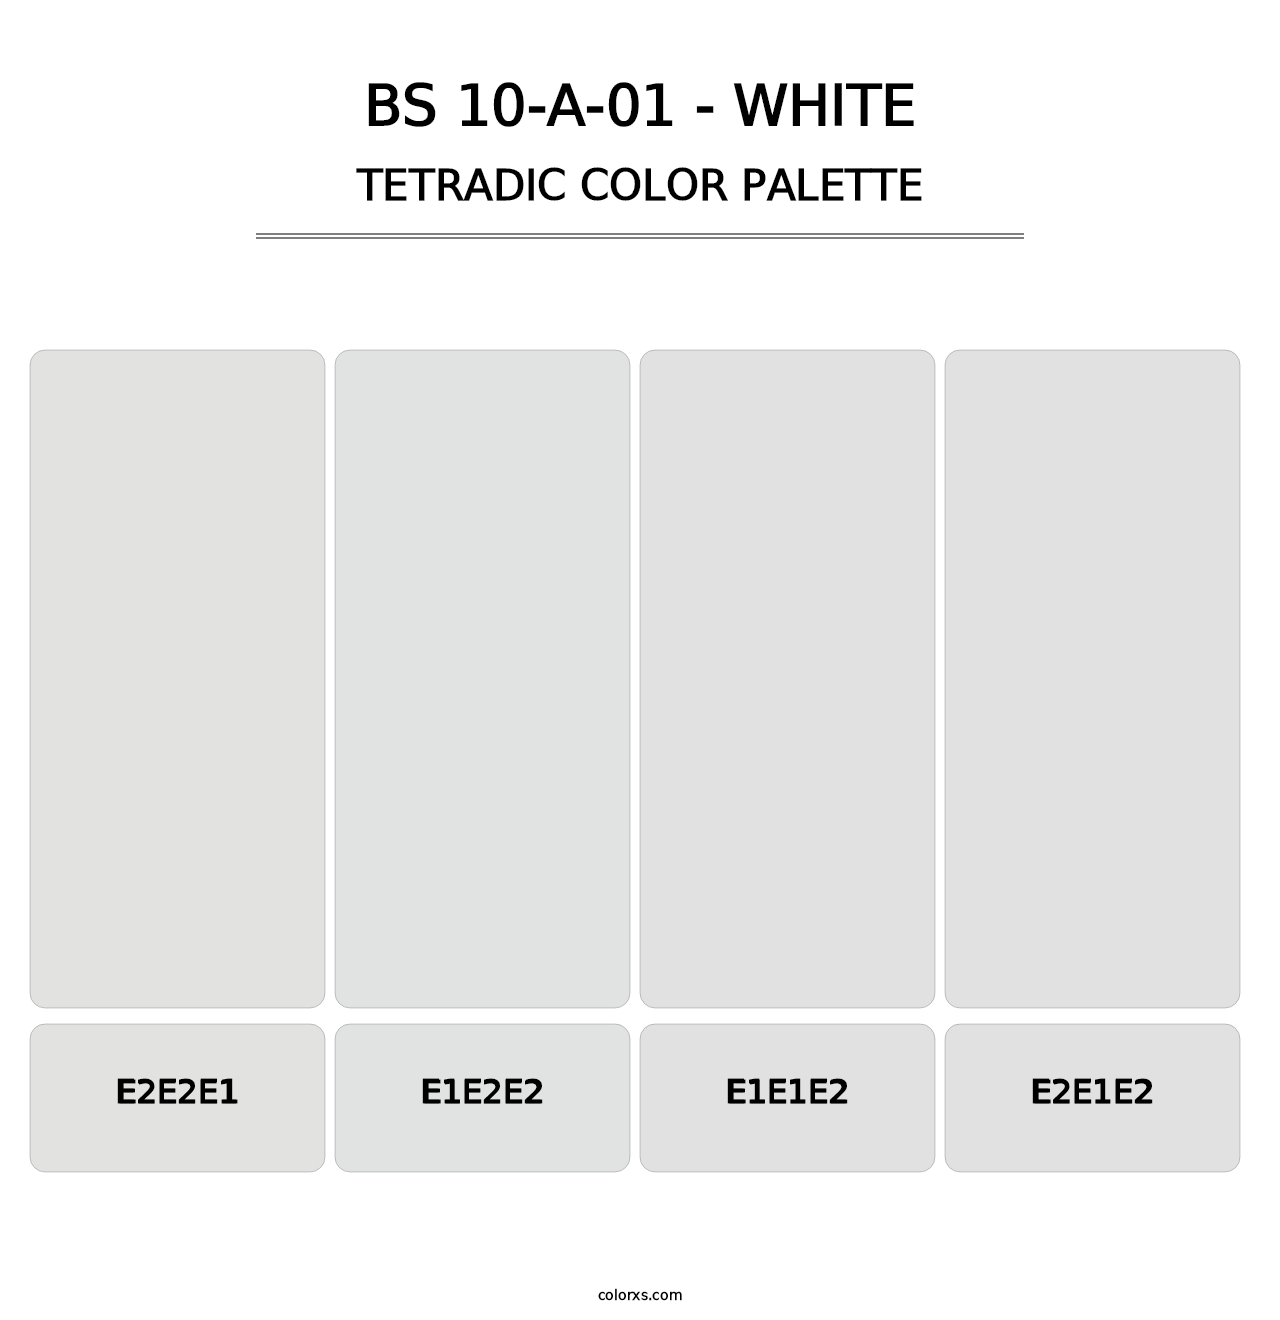 BS 10-A-01 - White - Tetradic Color Palette